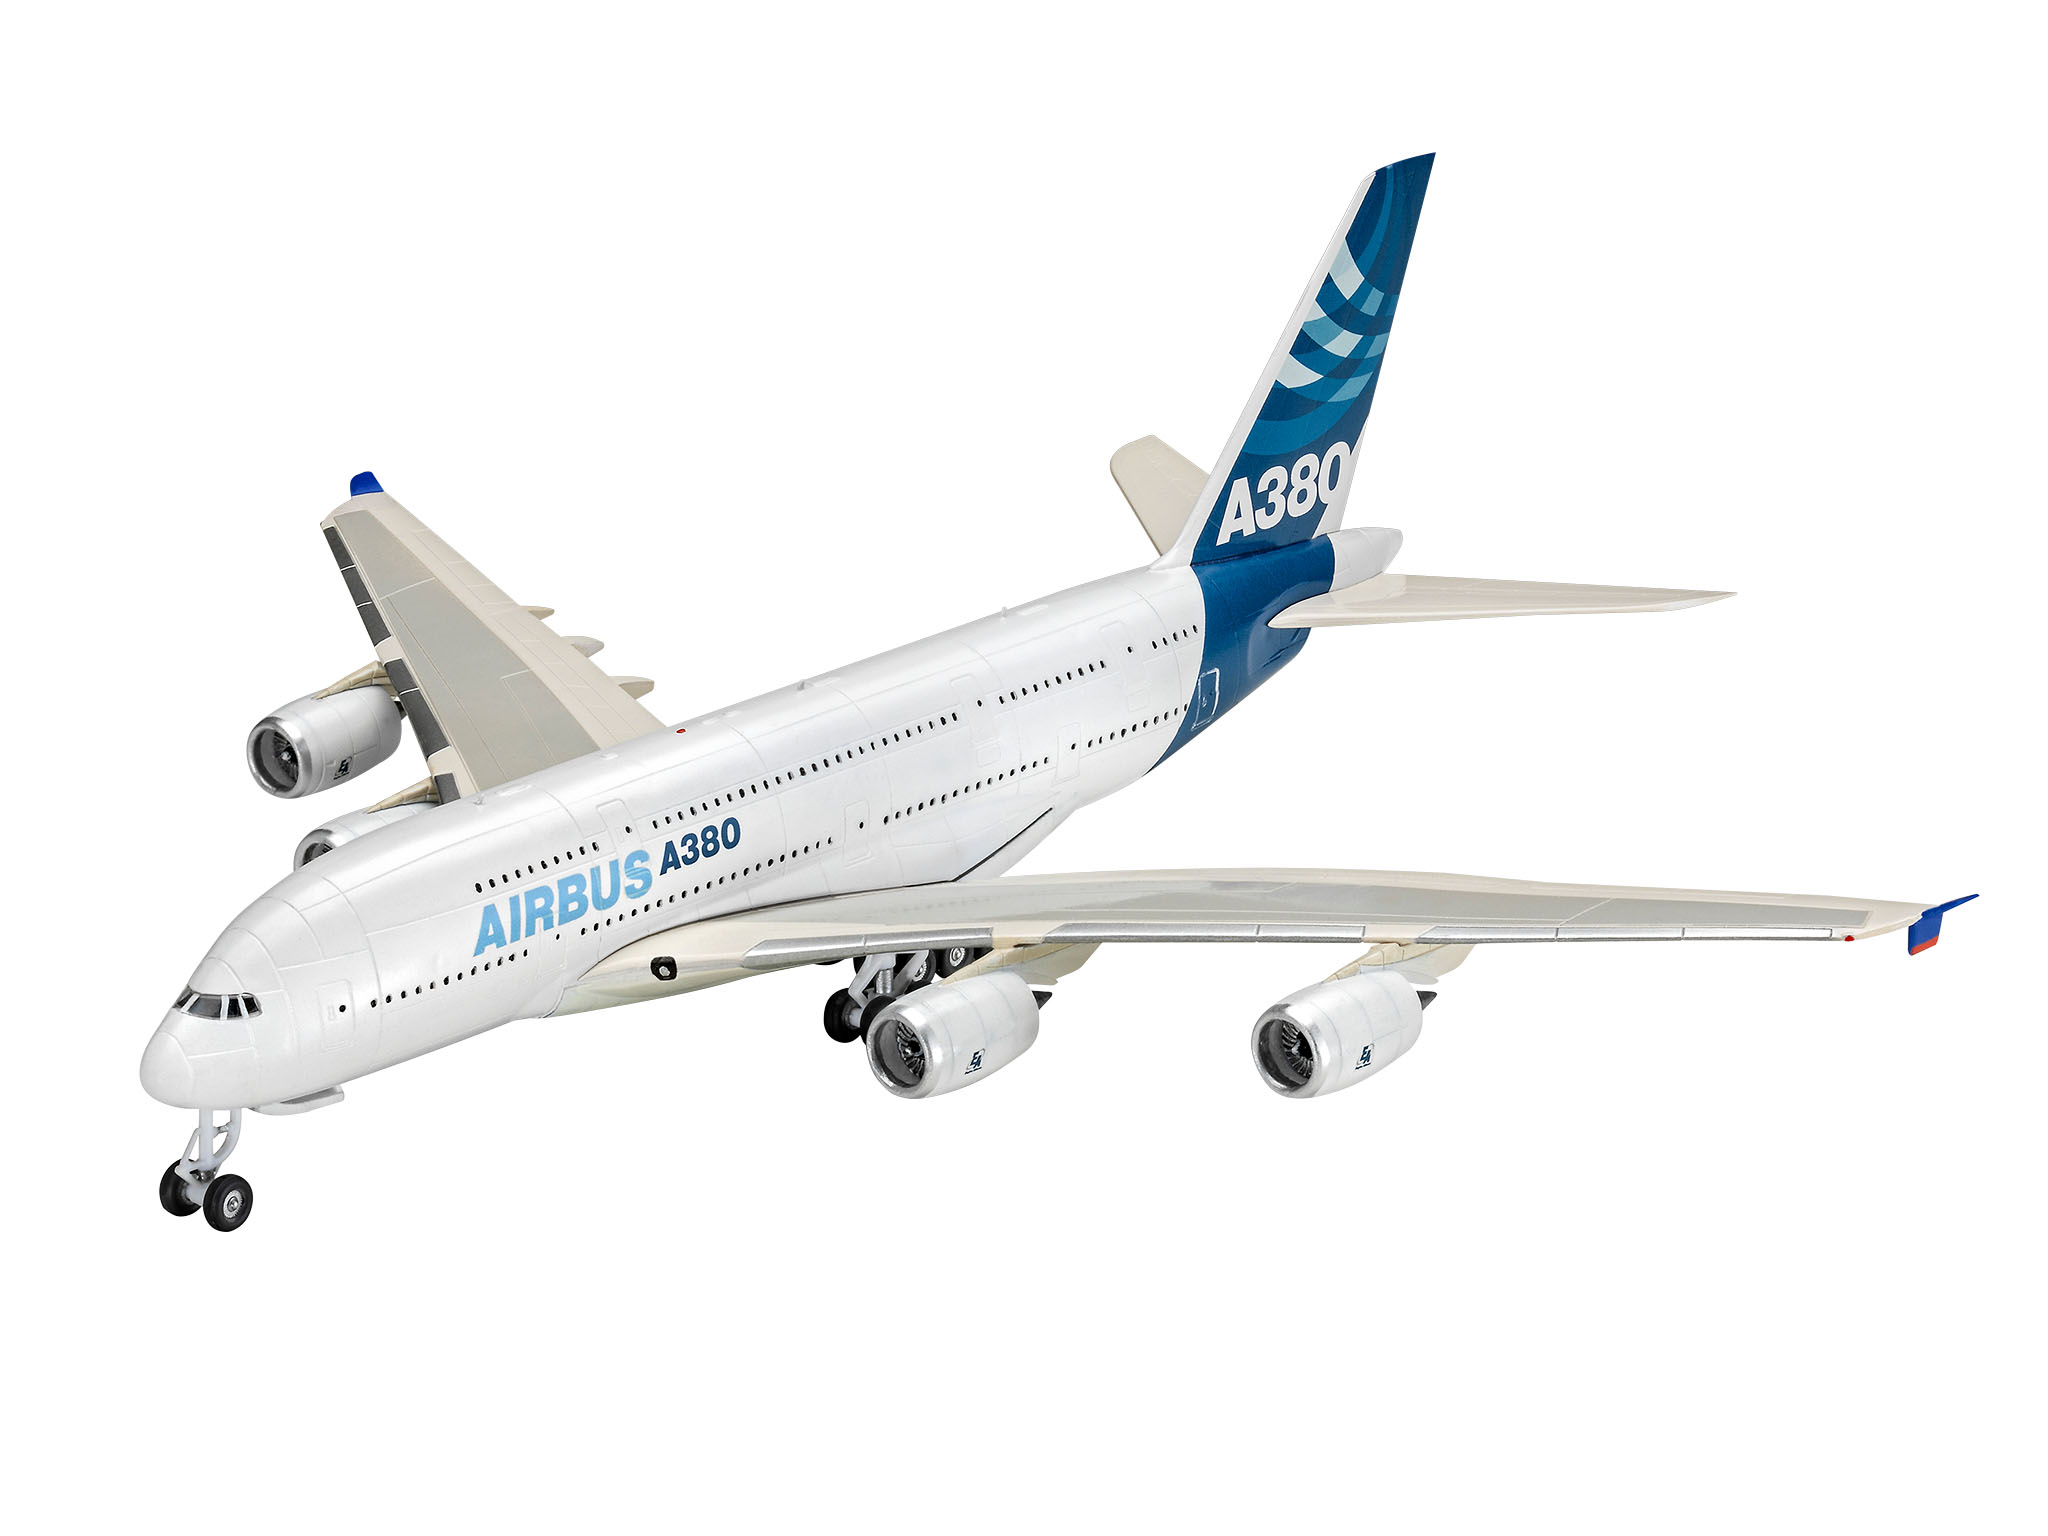 revell-03808-Airbus-A380-Werkslackierung-Livery